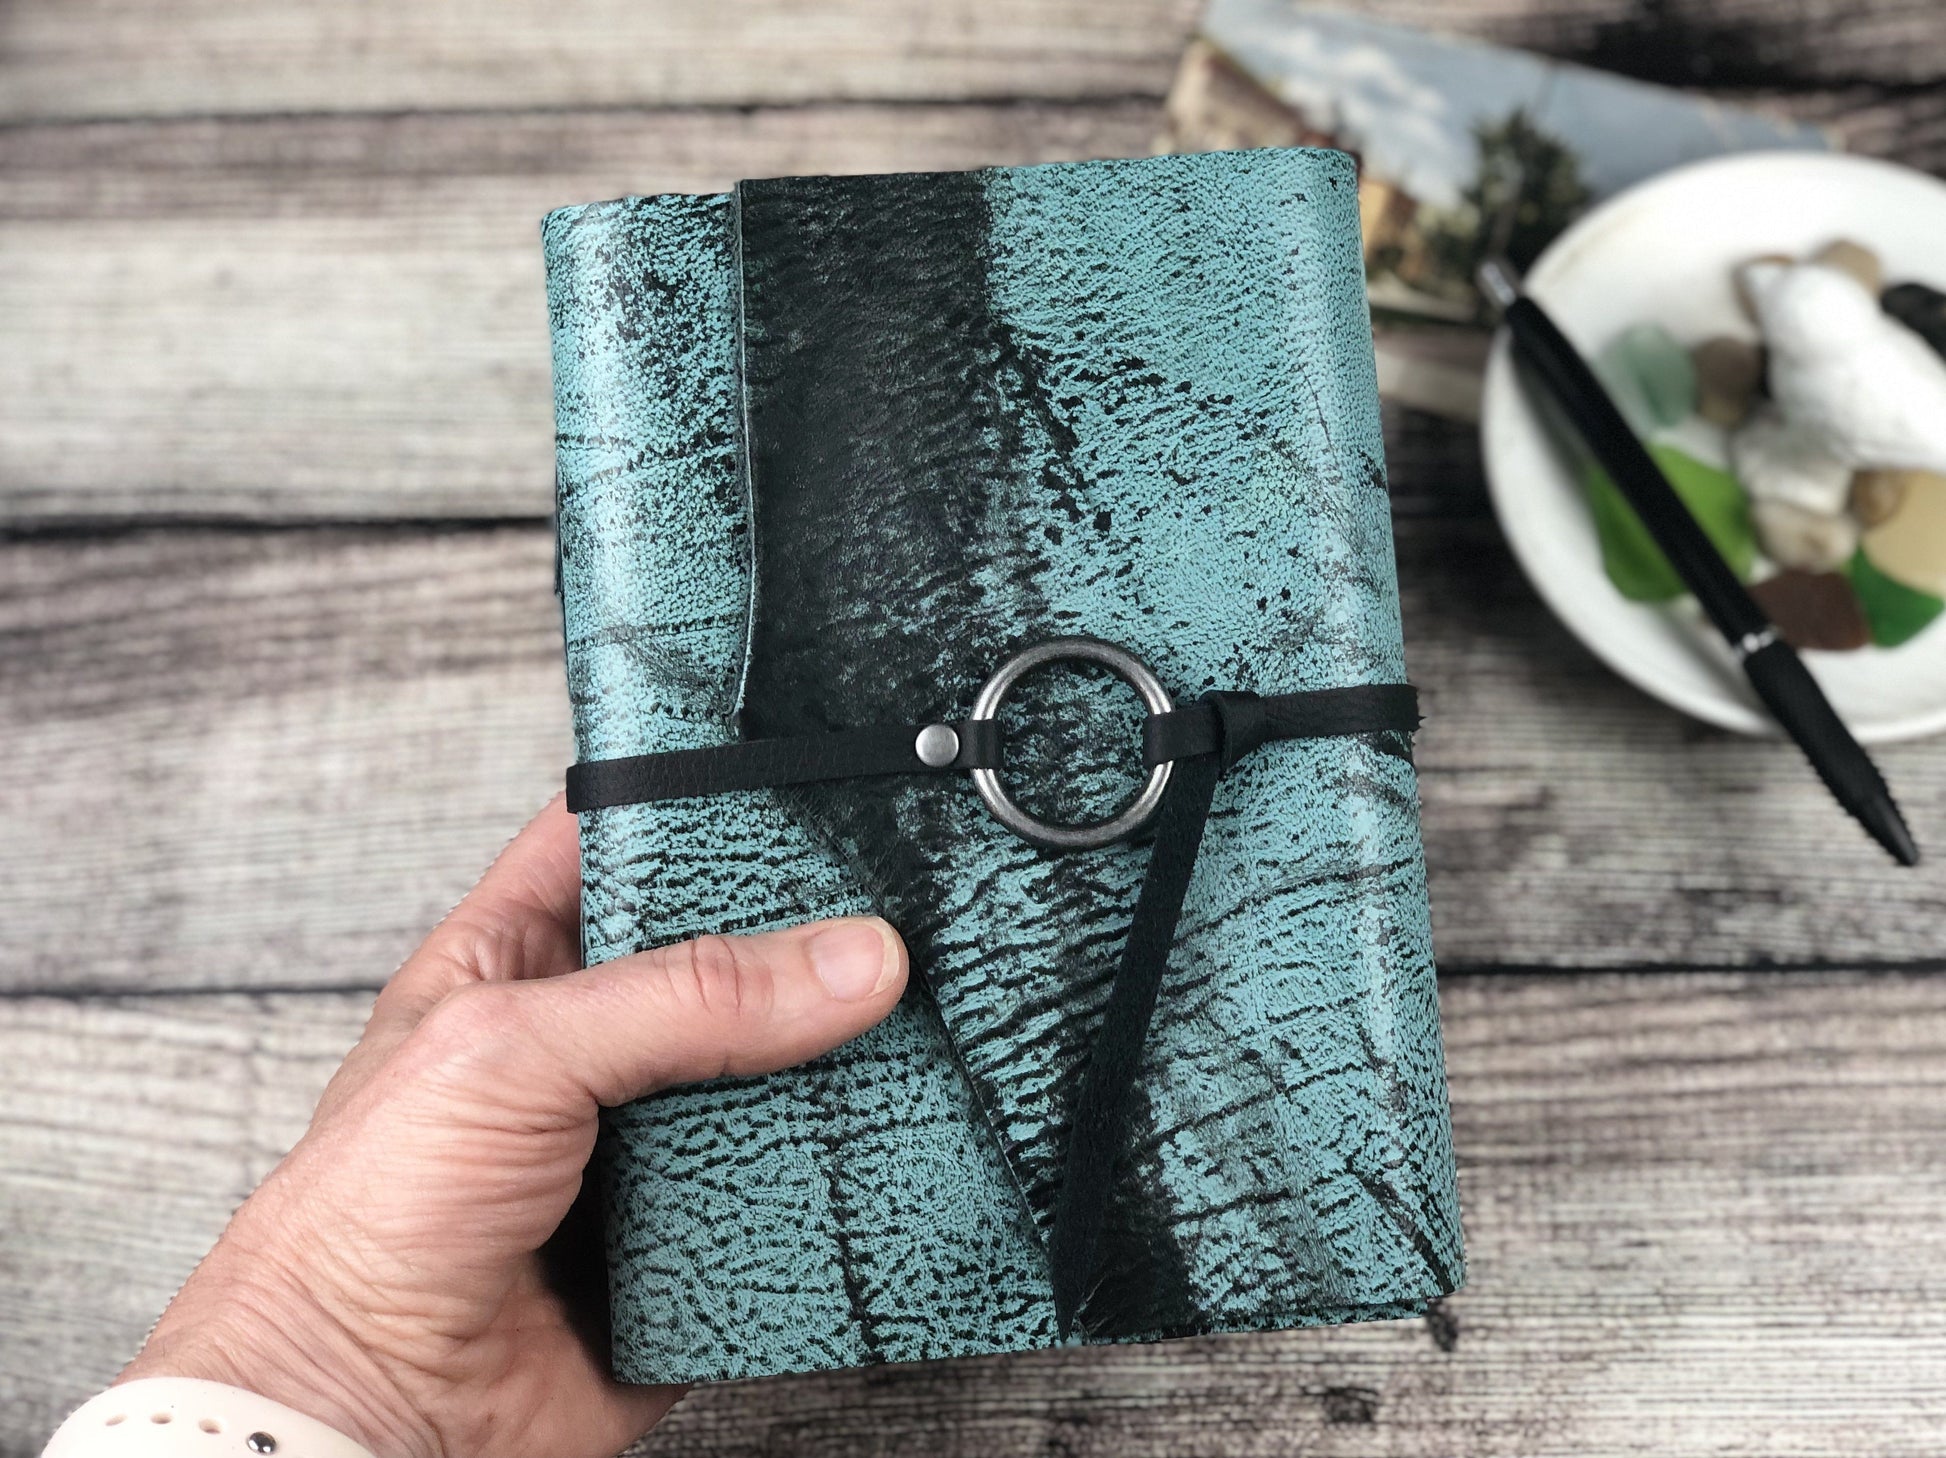 Medium Distressed Turquoise Journal leather journal Scroll & Ink 